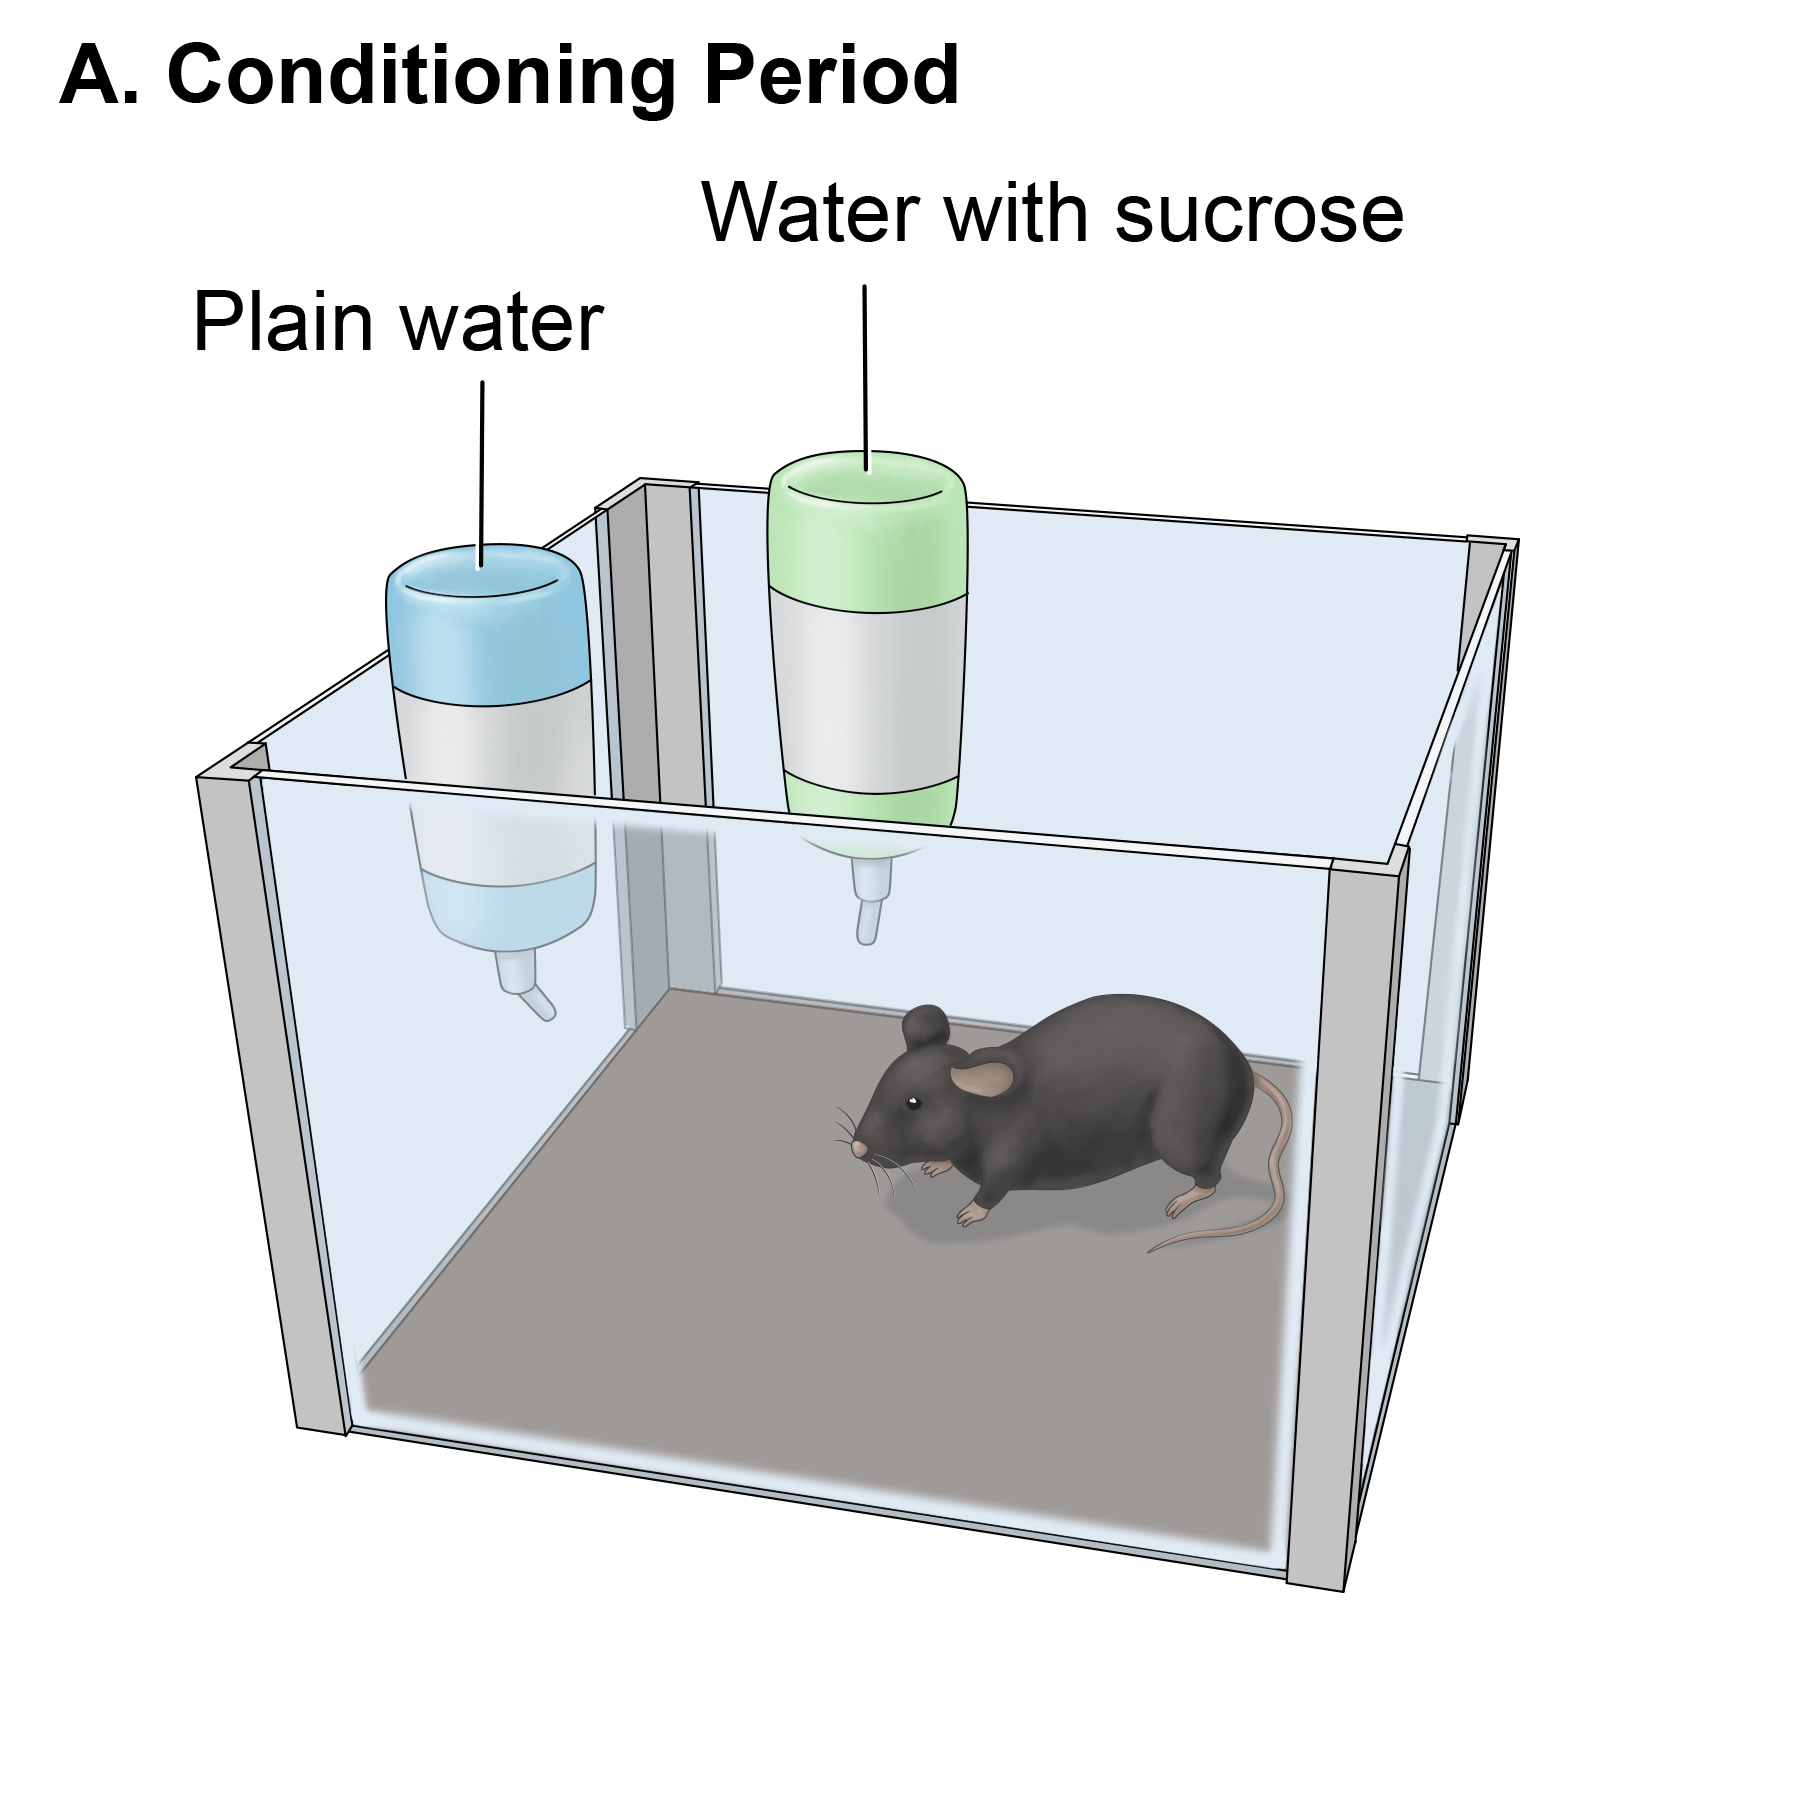 Rodent in container with a capsule of plain water and a capsule of water with sucrose